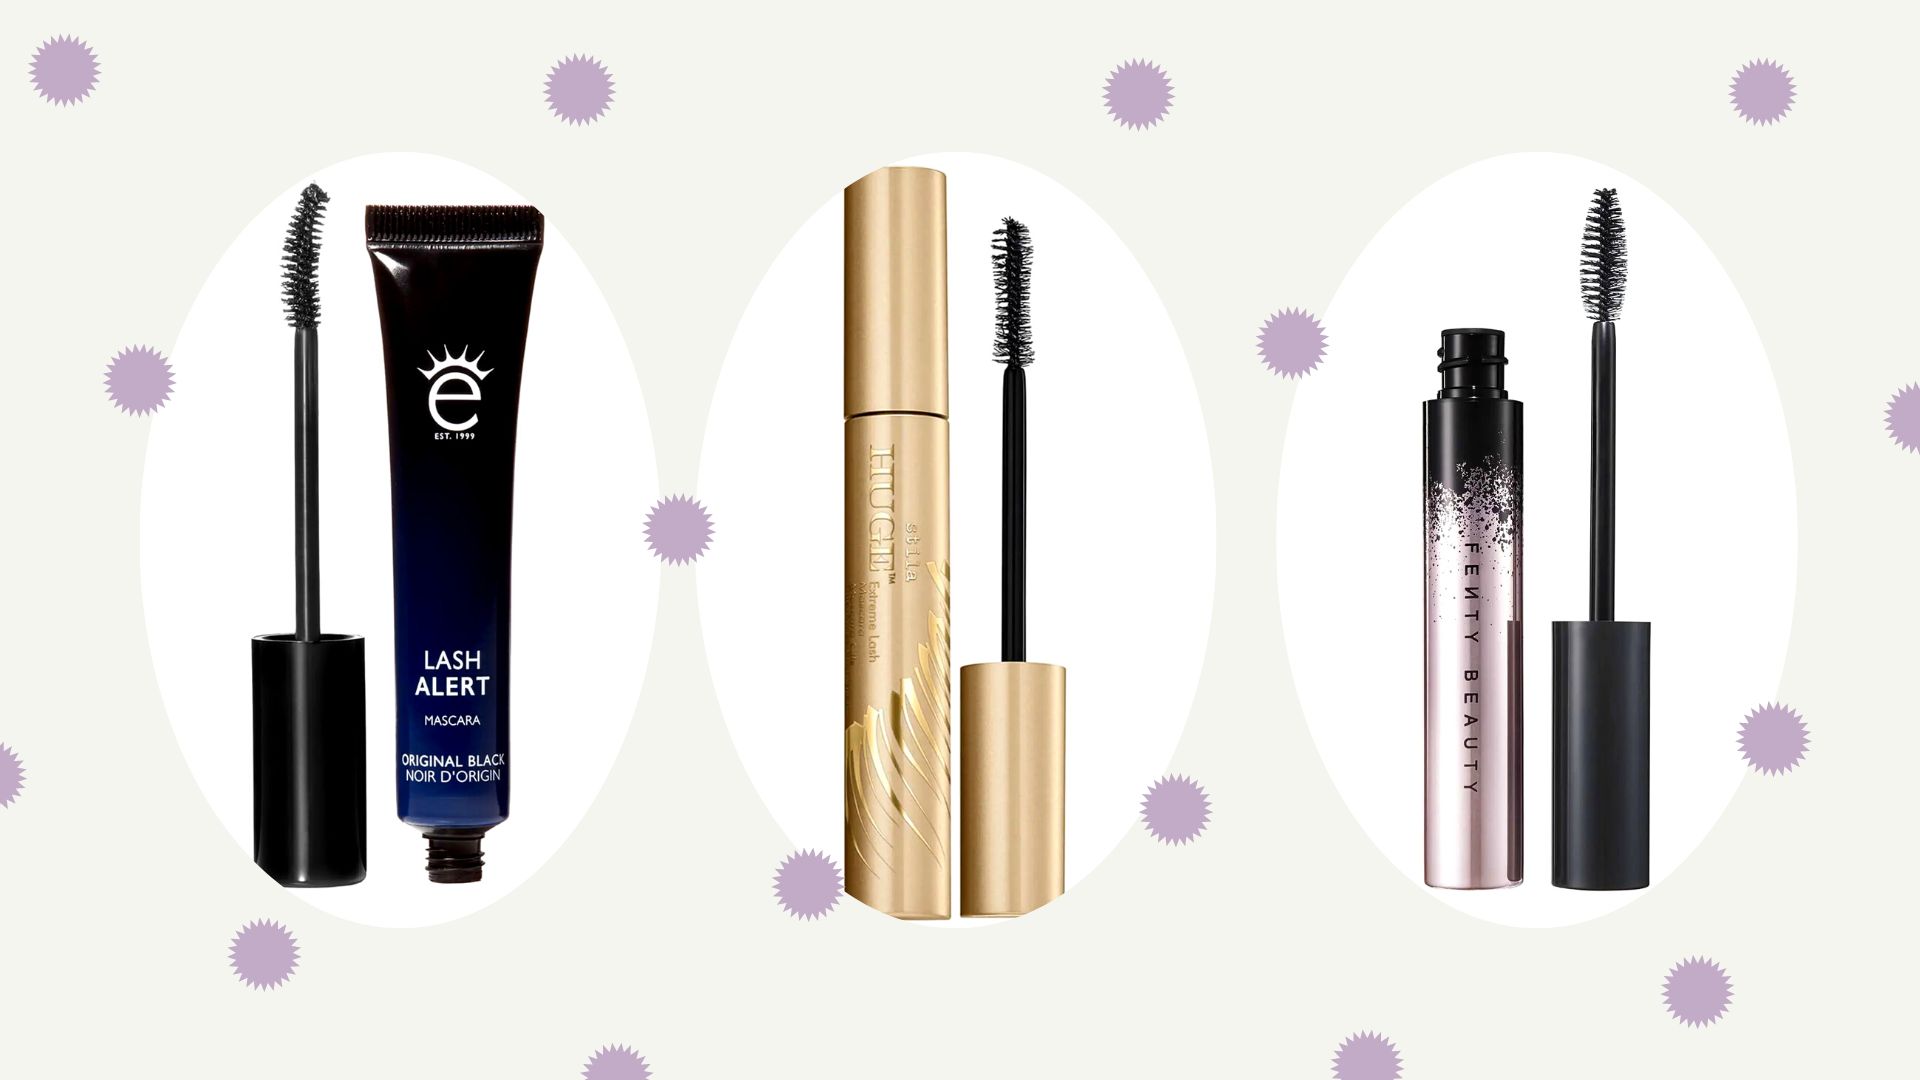 trække fritid sirene The 10 best mascaras for straight lashes to lift and curl | Woman & Home